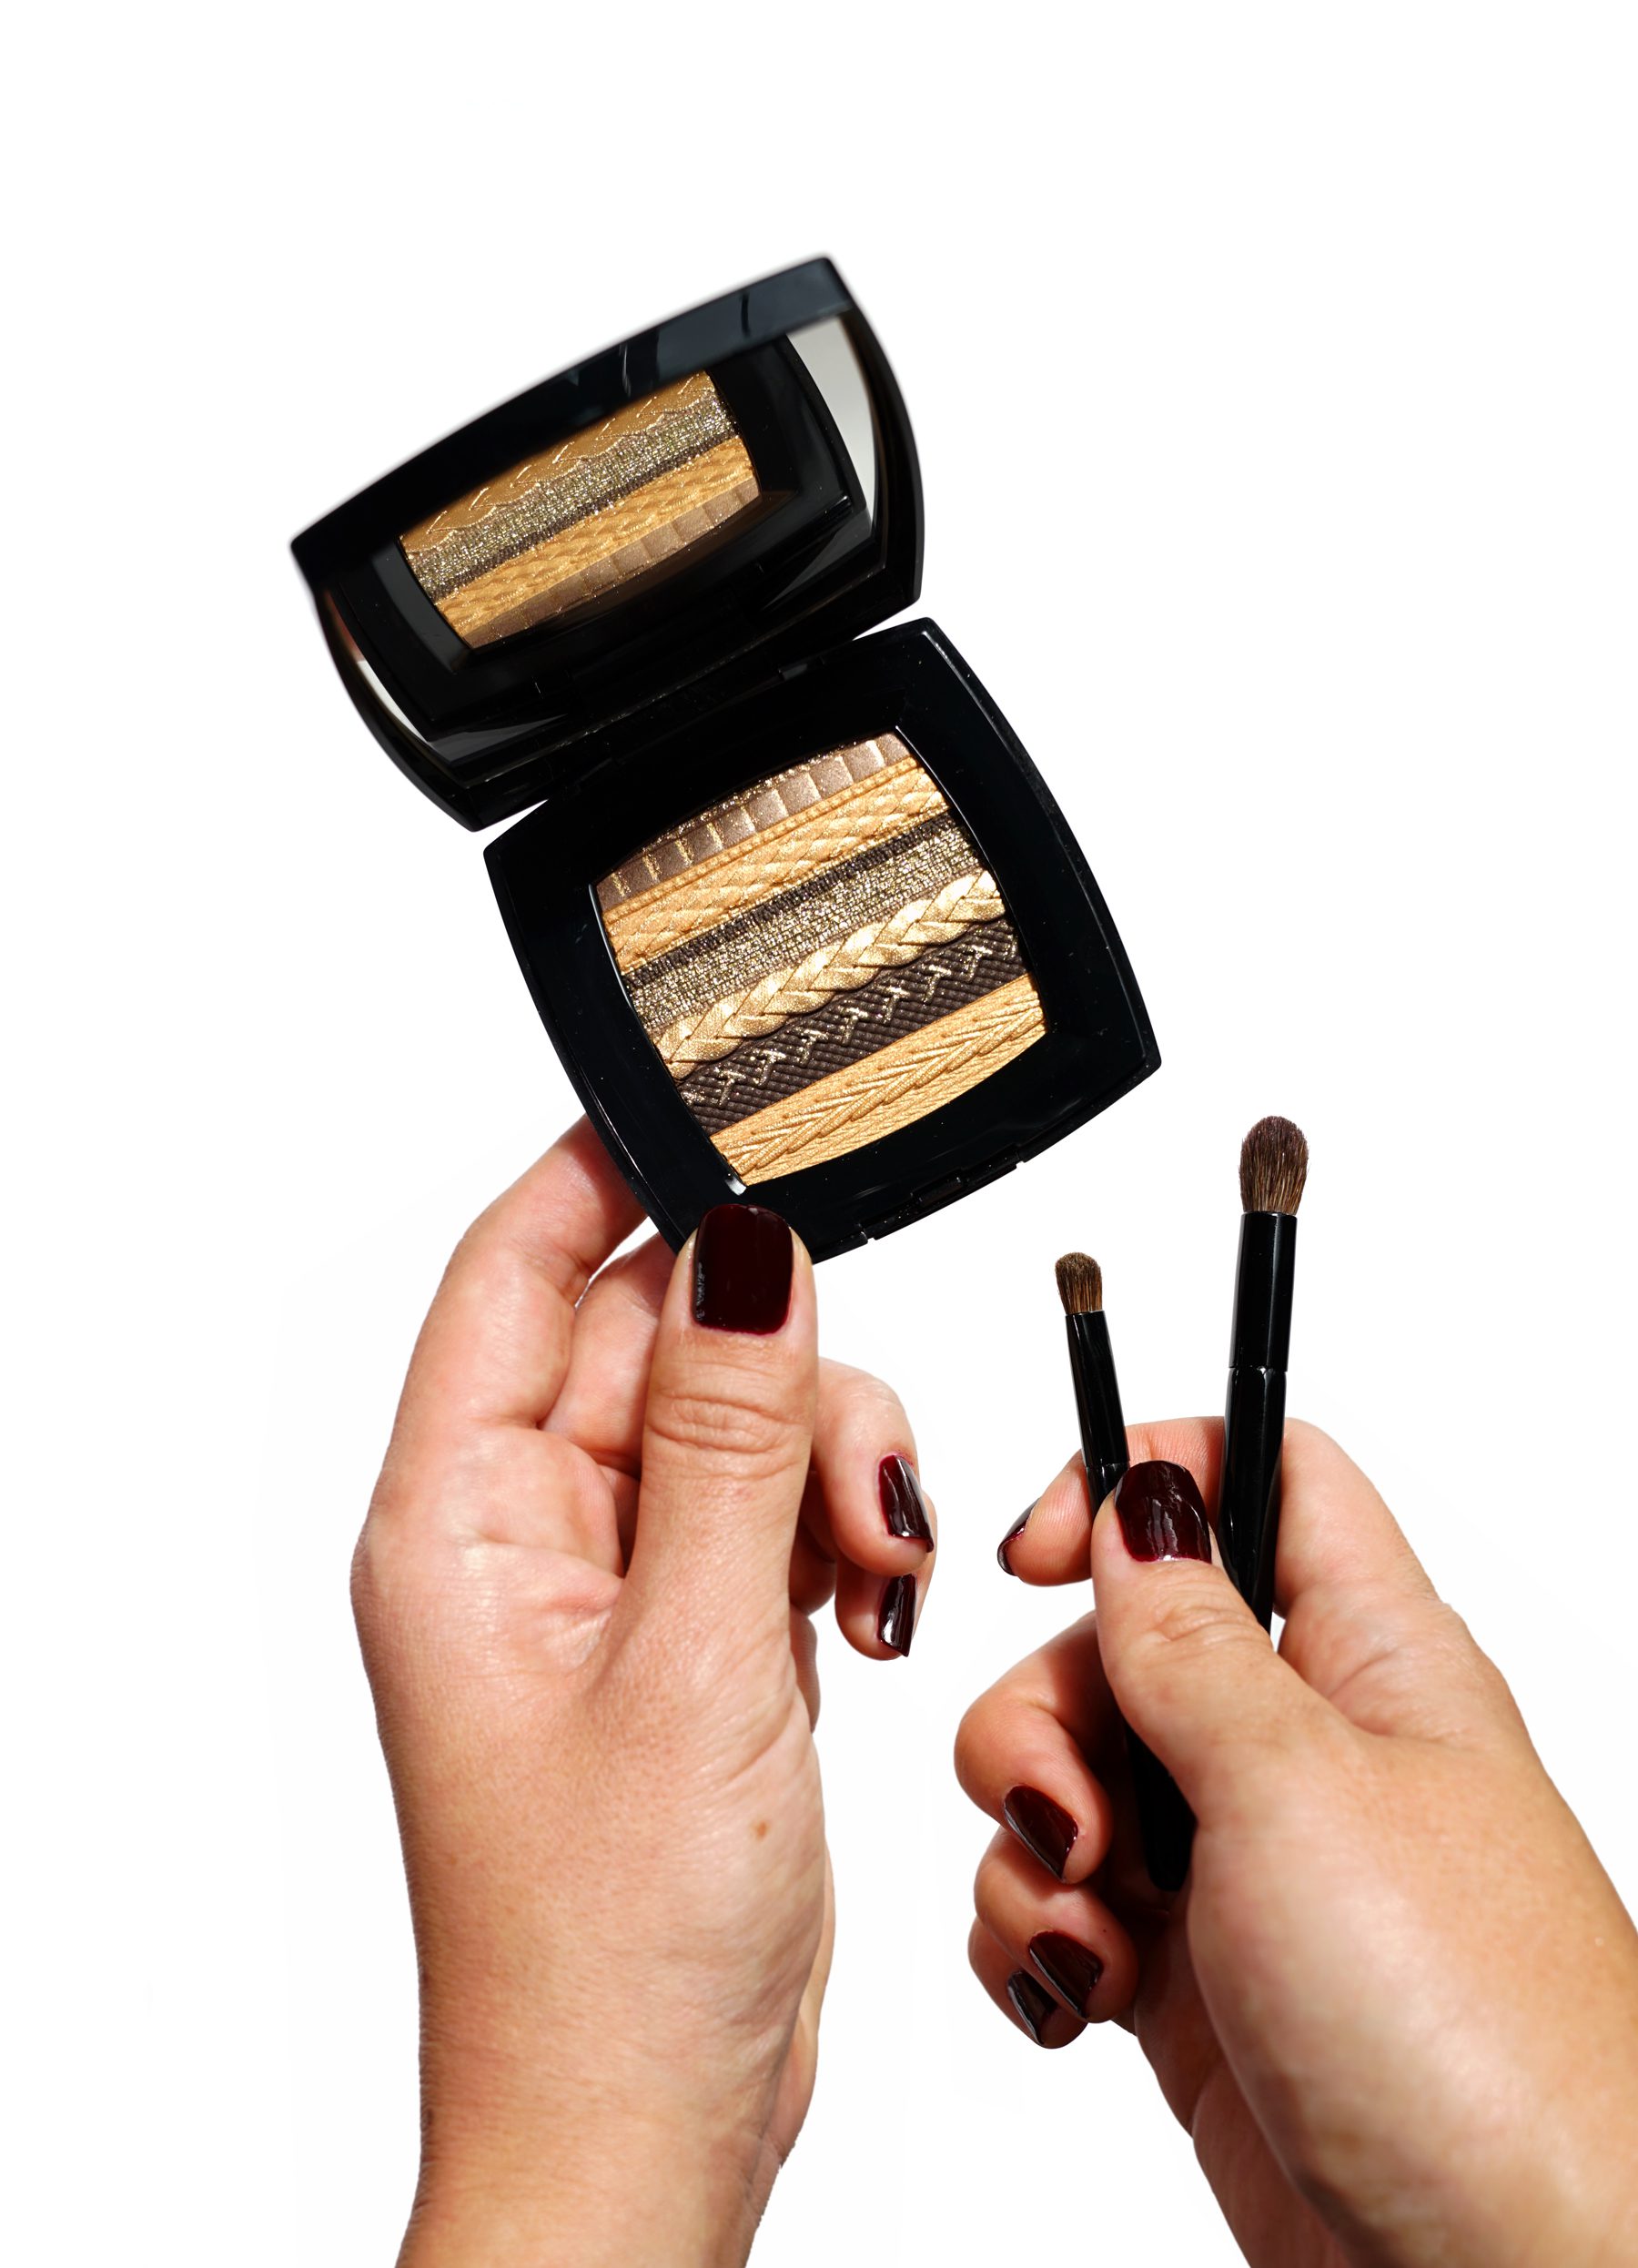 Chanel Charming Ombres Matelassées  Holiday 2013 - The Beauty Look Book